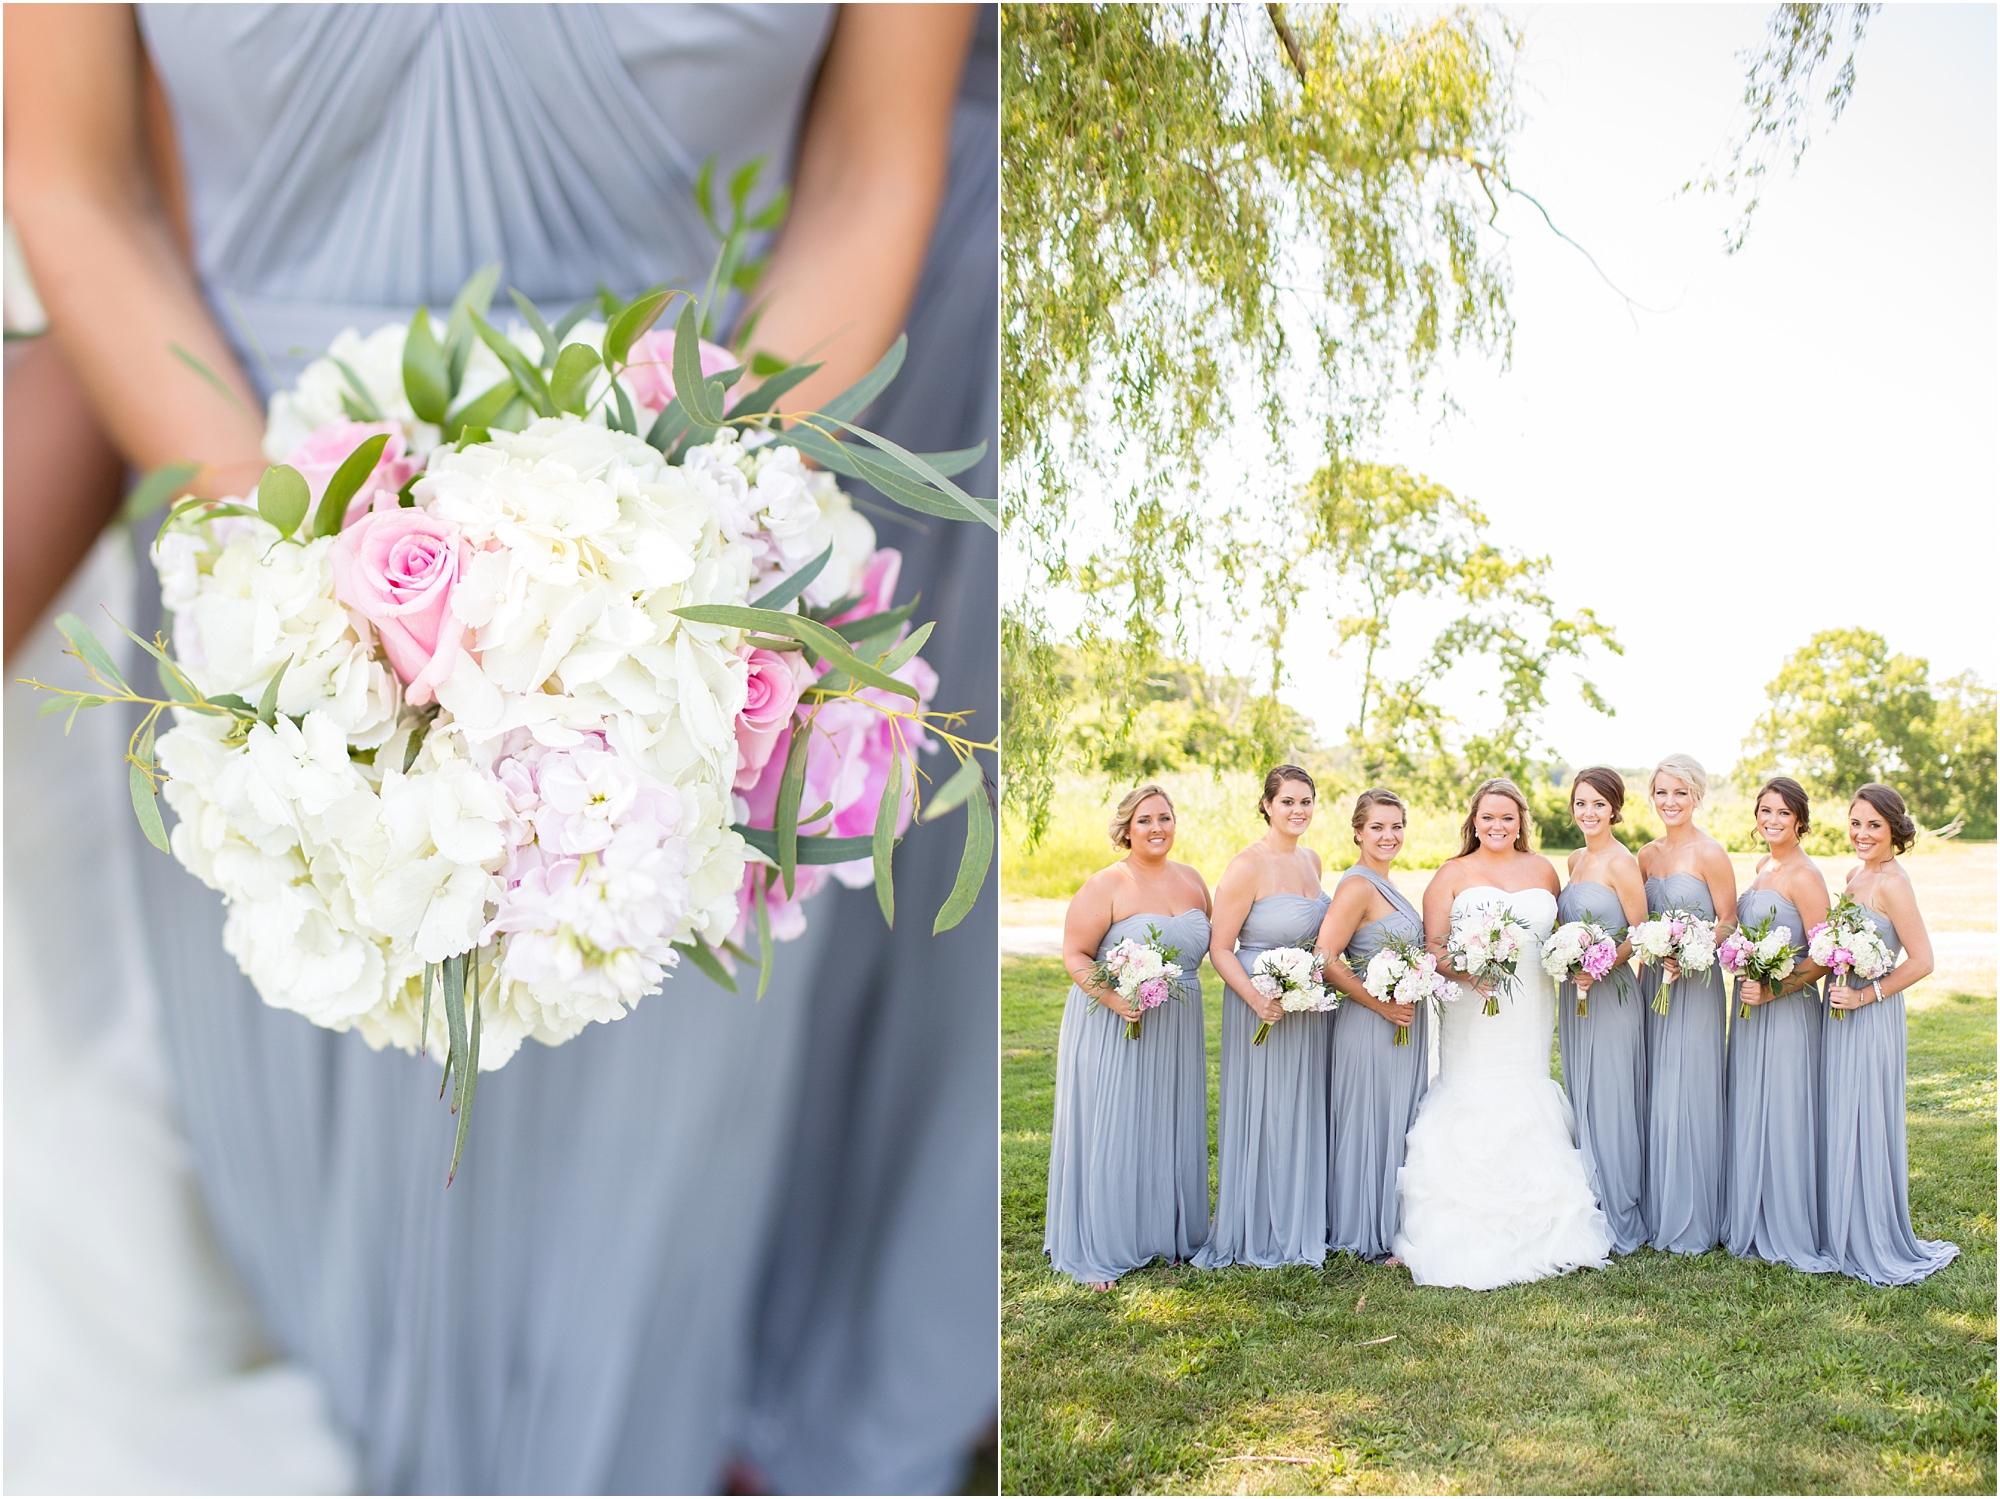 Peterson 4-Bridal Party-375_anna grace photography milford connecticut destination wedding photographer Great River Country Club photo.jpg